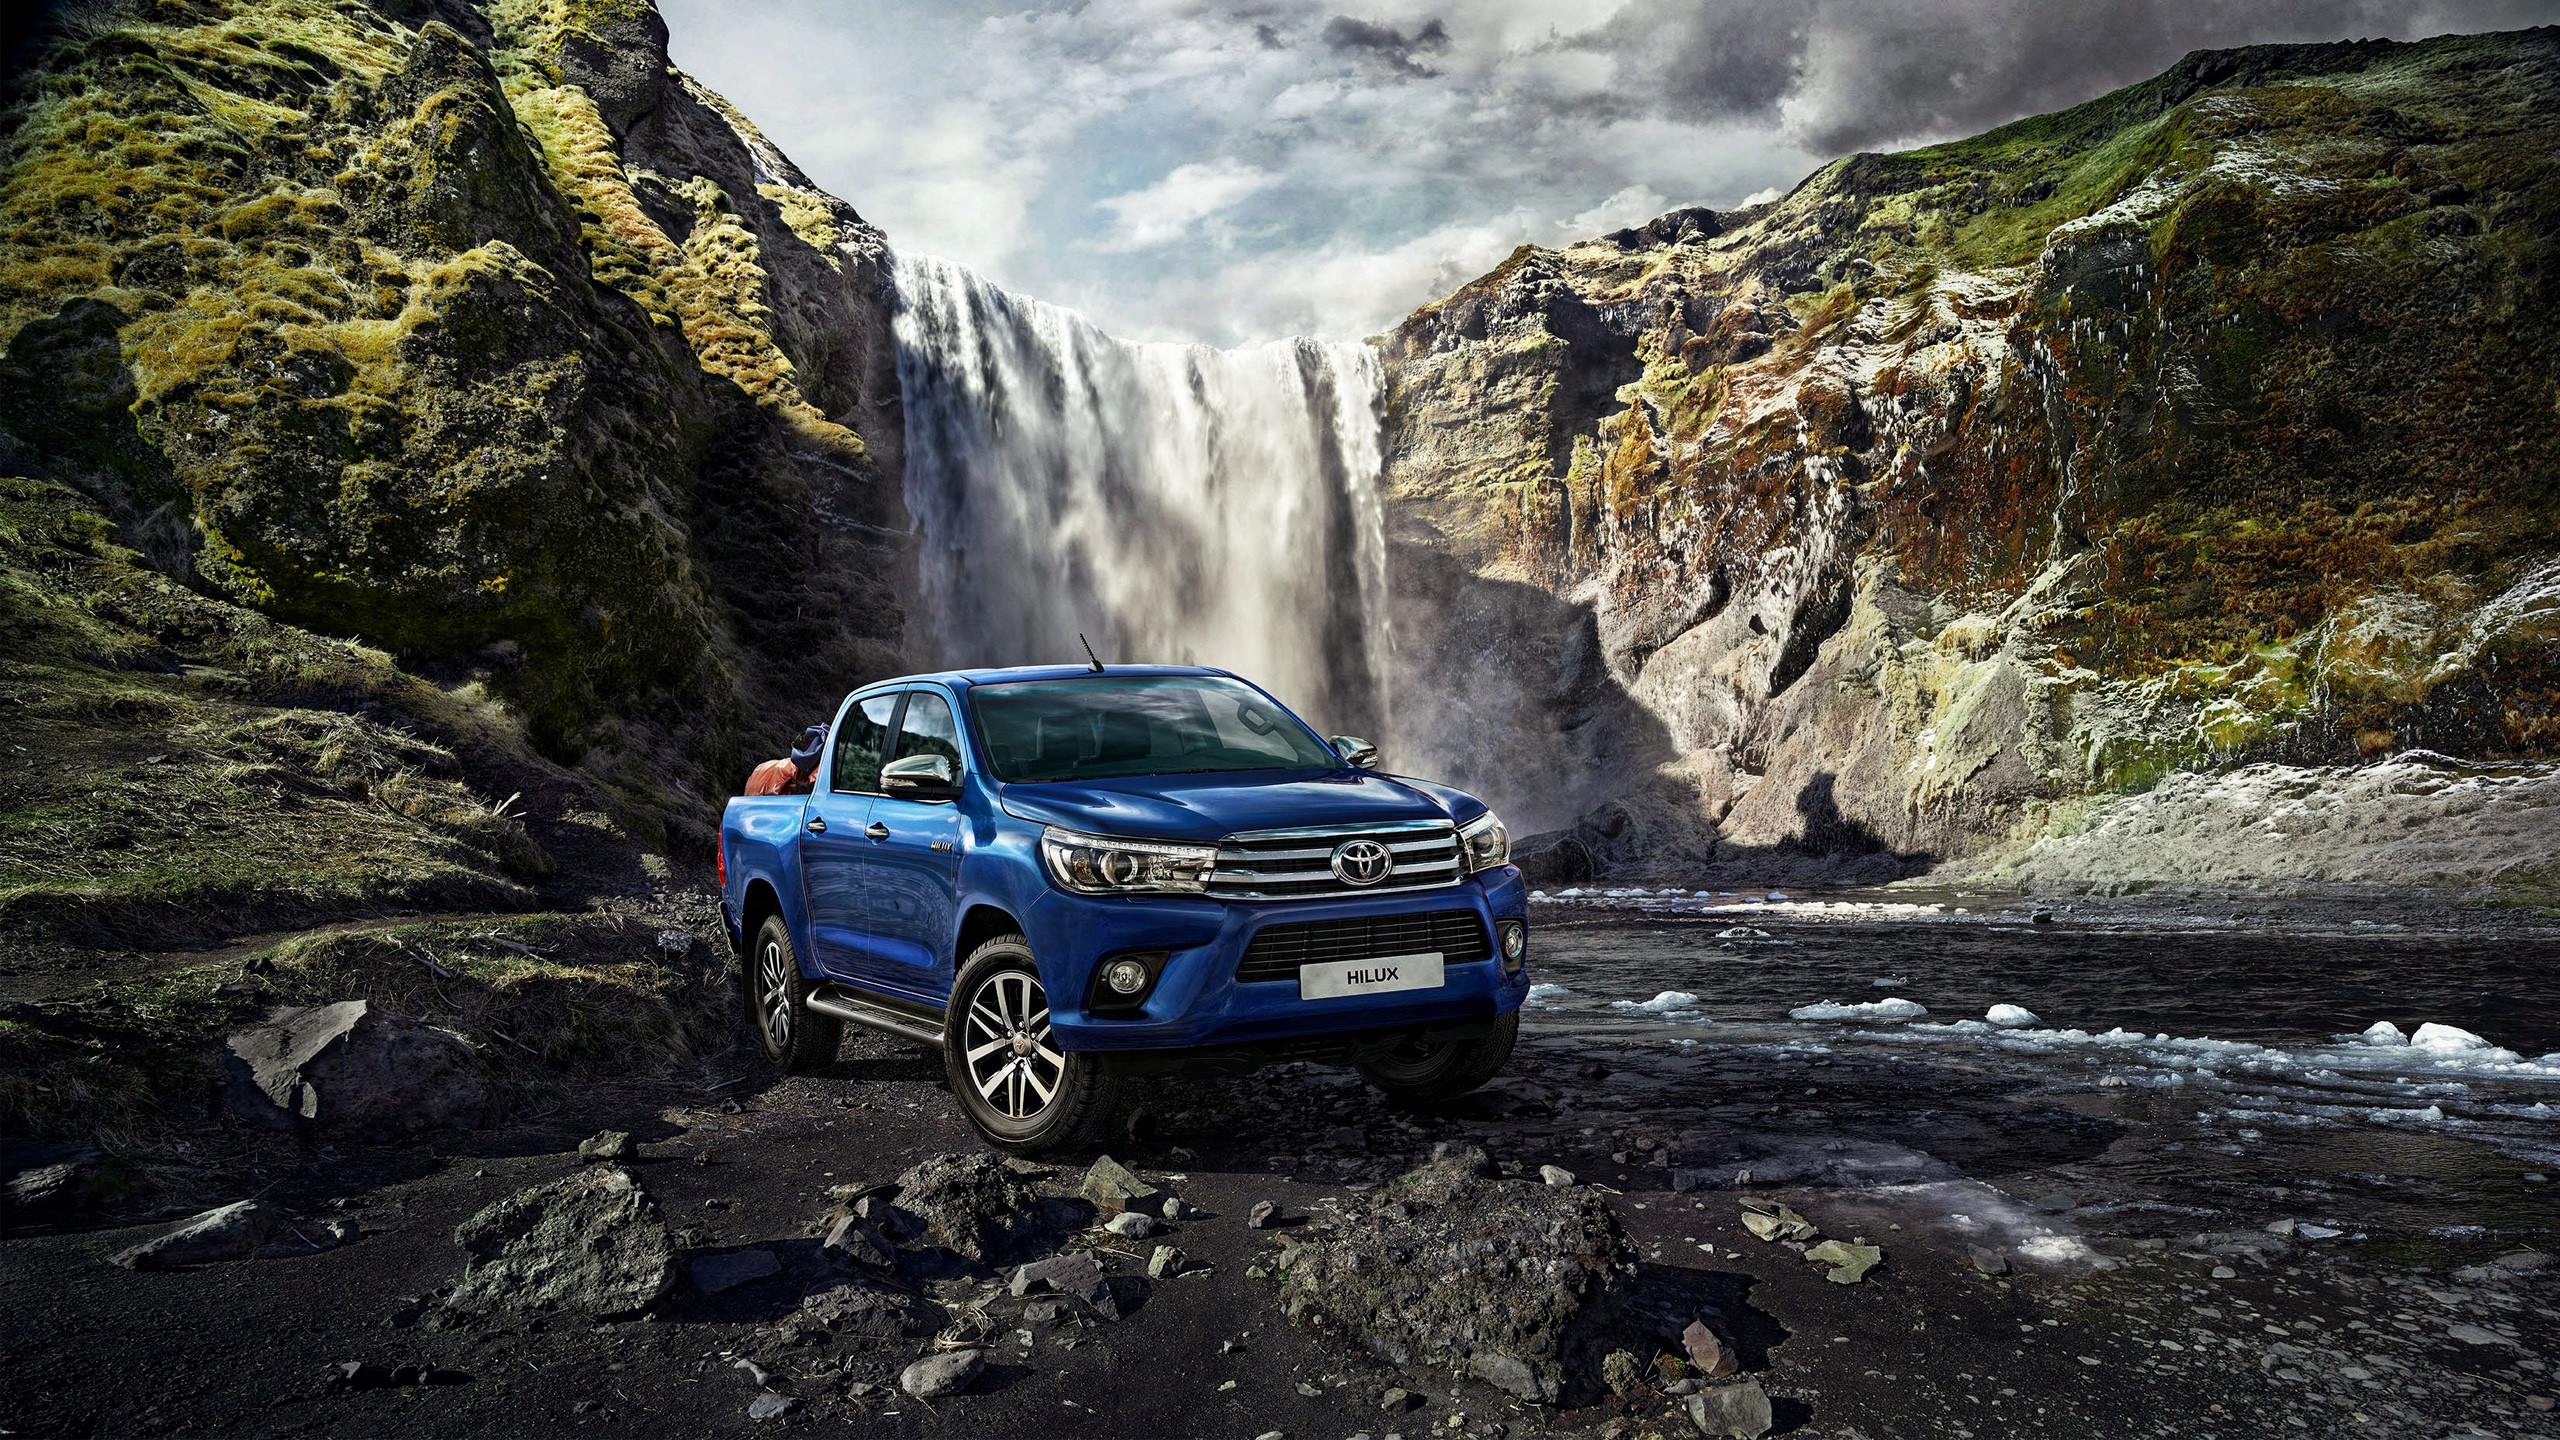 hilux wallpaper,vehicle,nature,car,sport utility vehicle,off roading